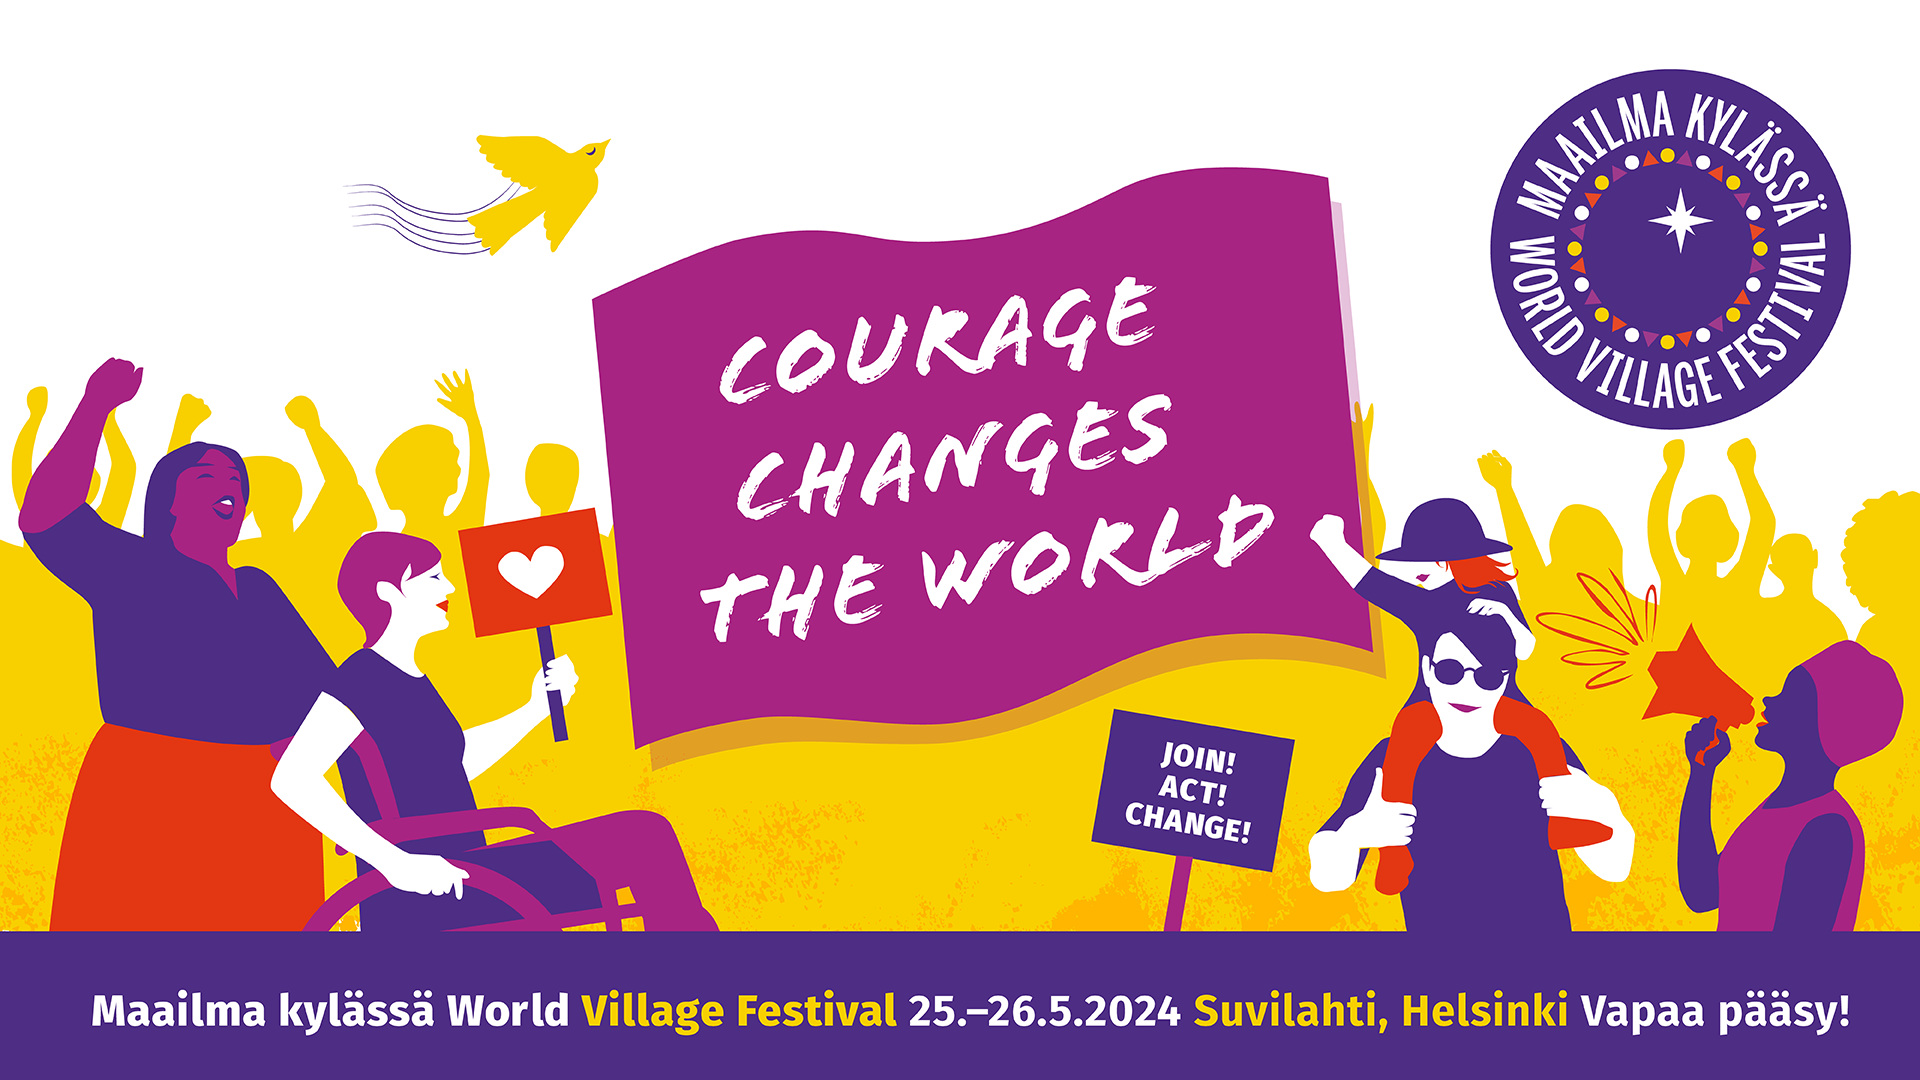 World Village Festival ad banner with text courage changes the world.